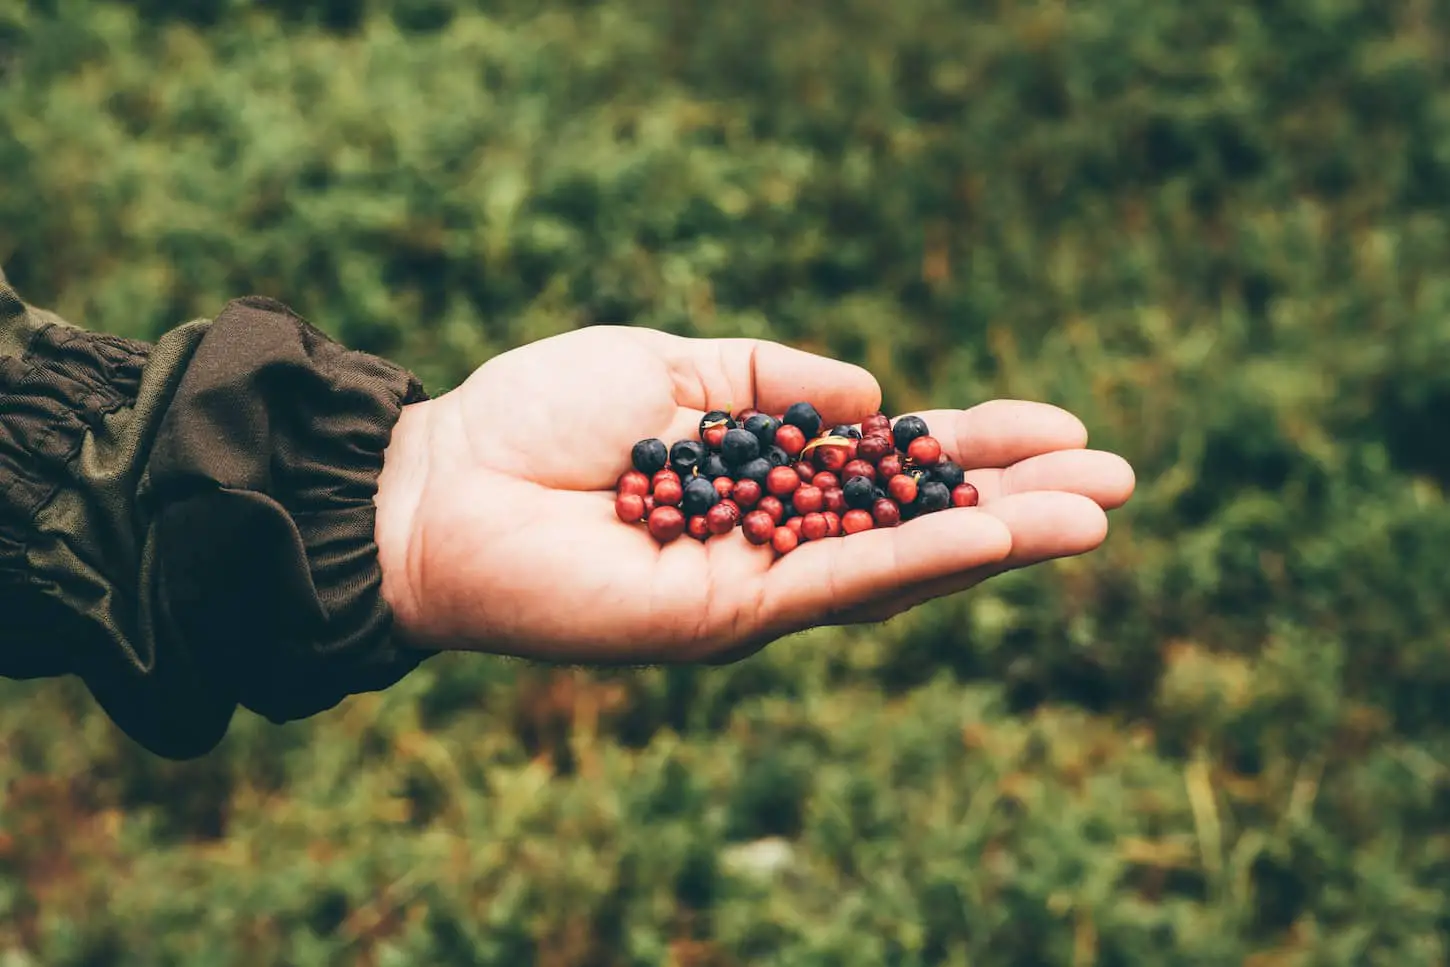 An image of a person showing huckleberries in the garden.